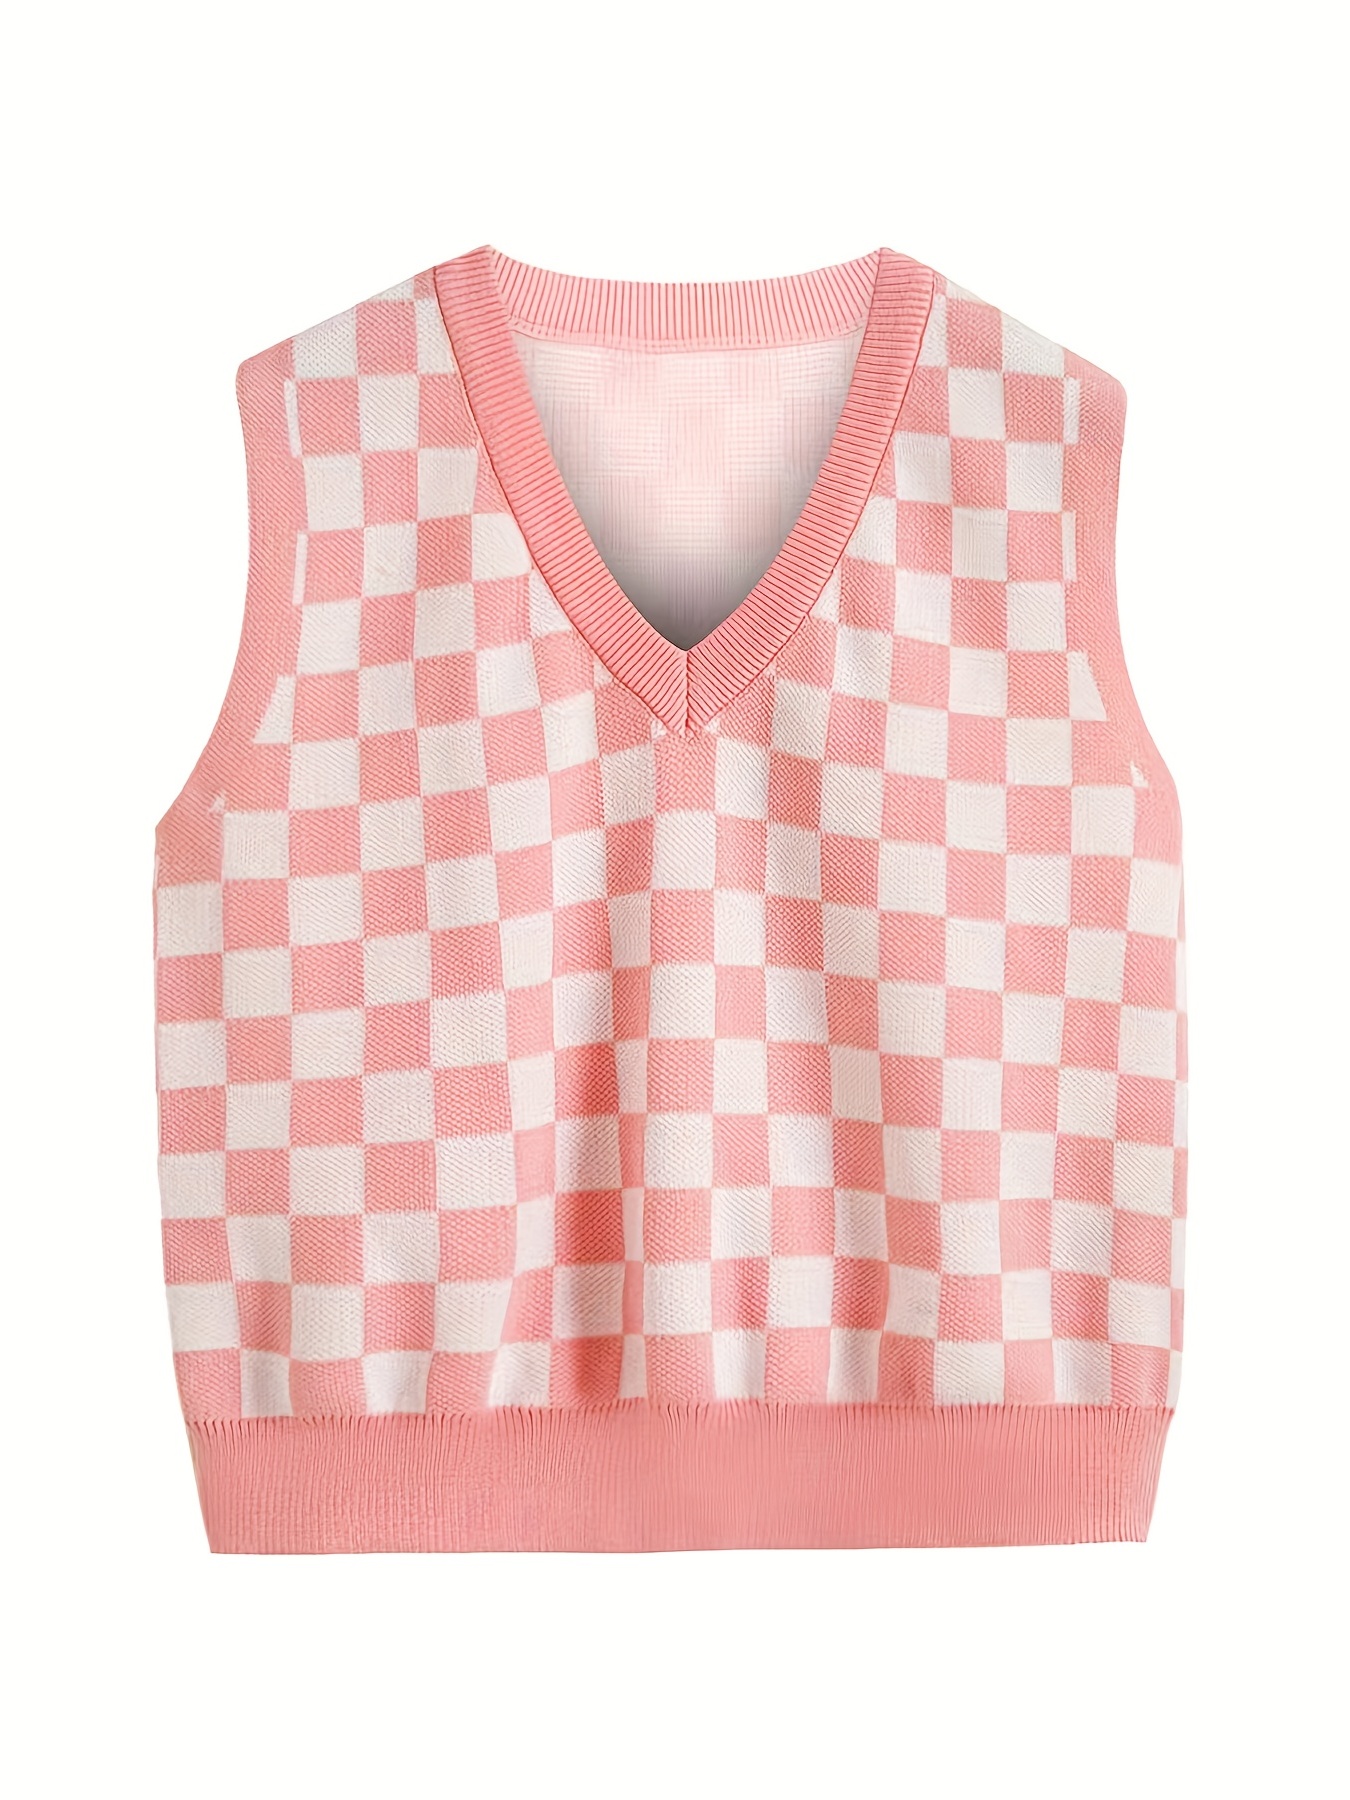 Sweet Pink Checkerboard Cami Top For Girls And Women Vintage Knit